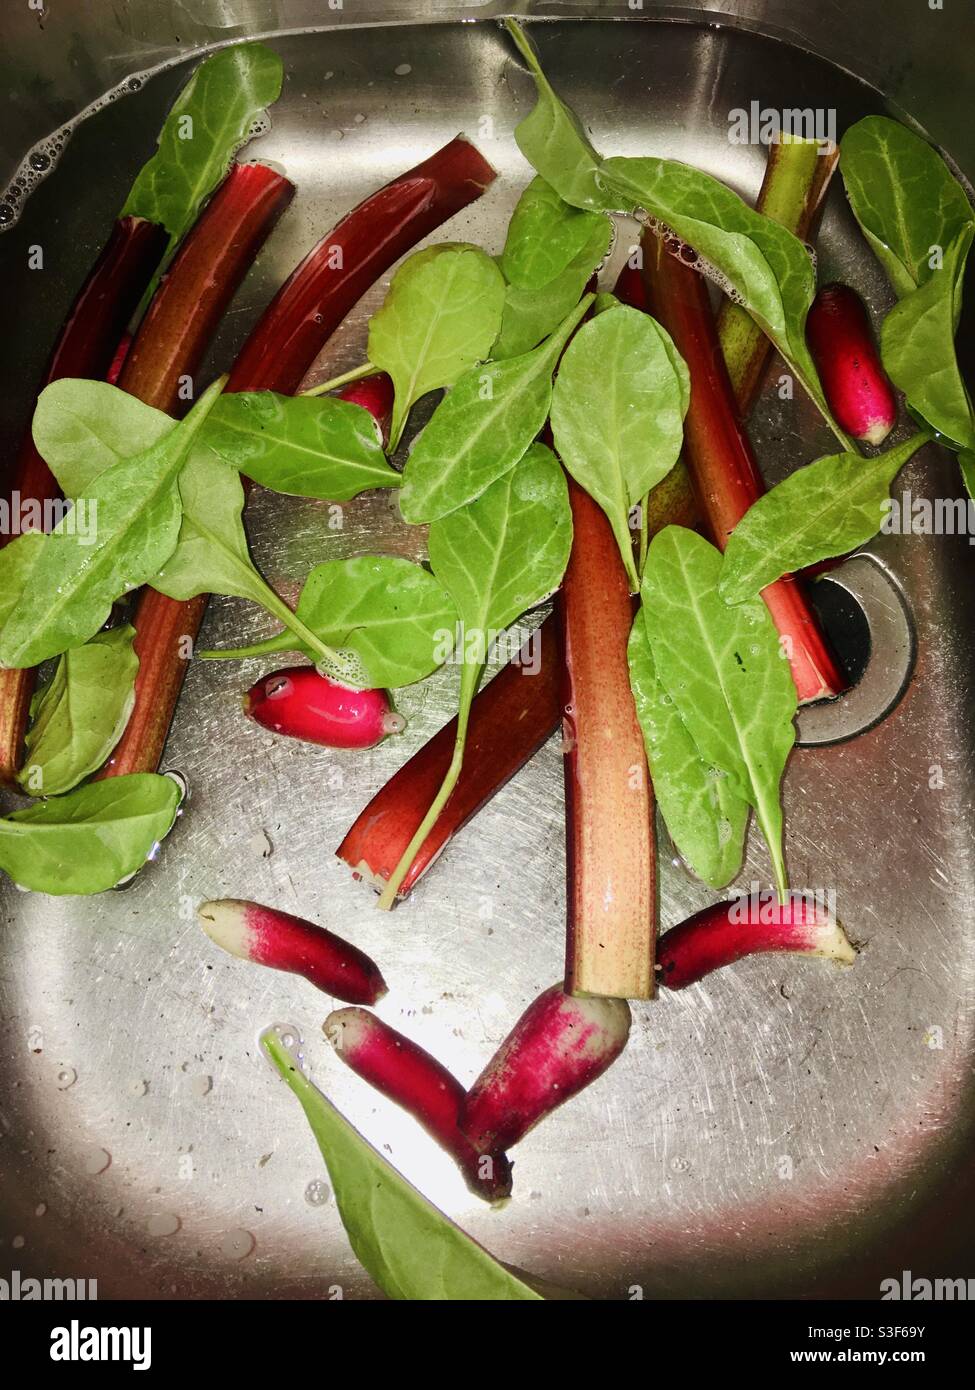 Washing freshly picked rhubarb spinach and radish in the sink - food preparation during COVID-19 lockdown Stock Photo